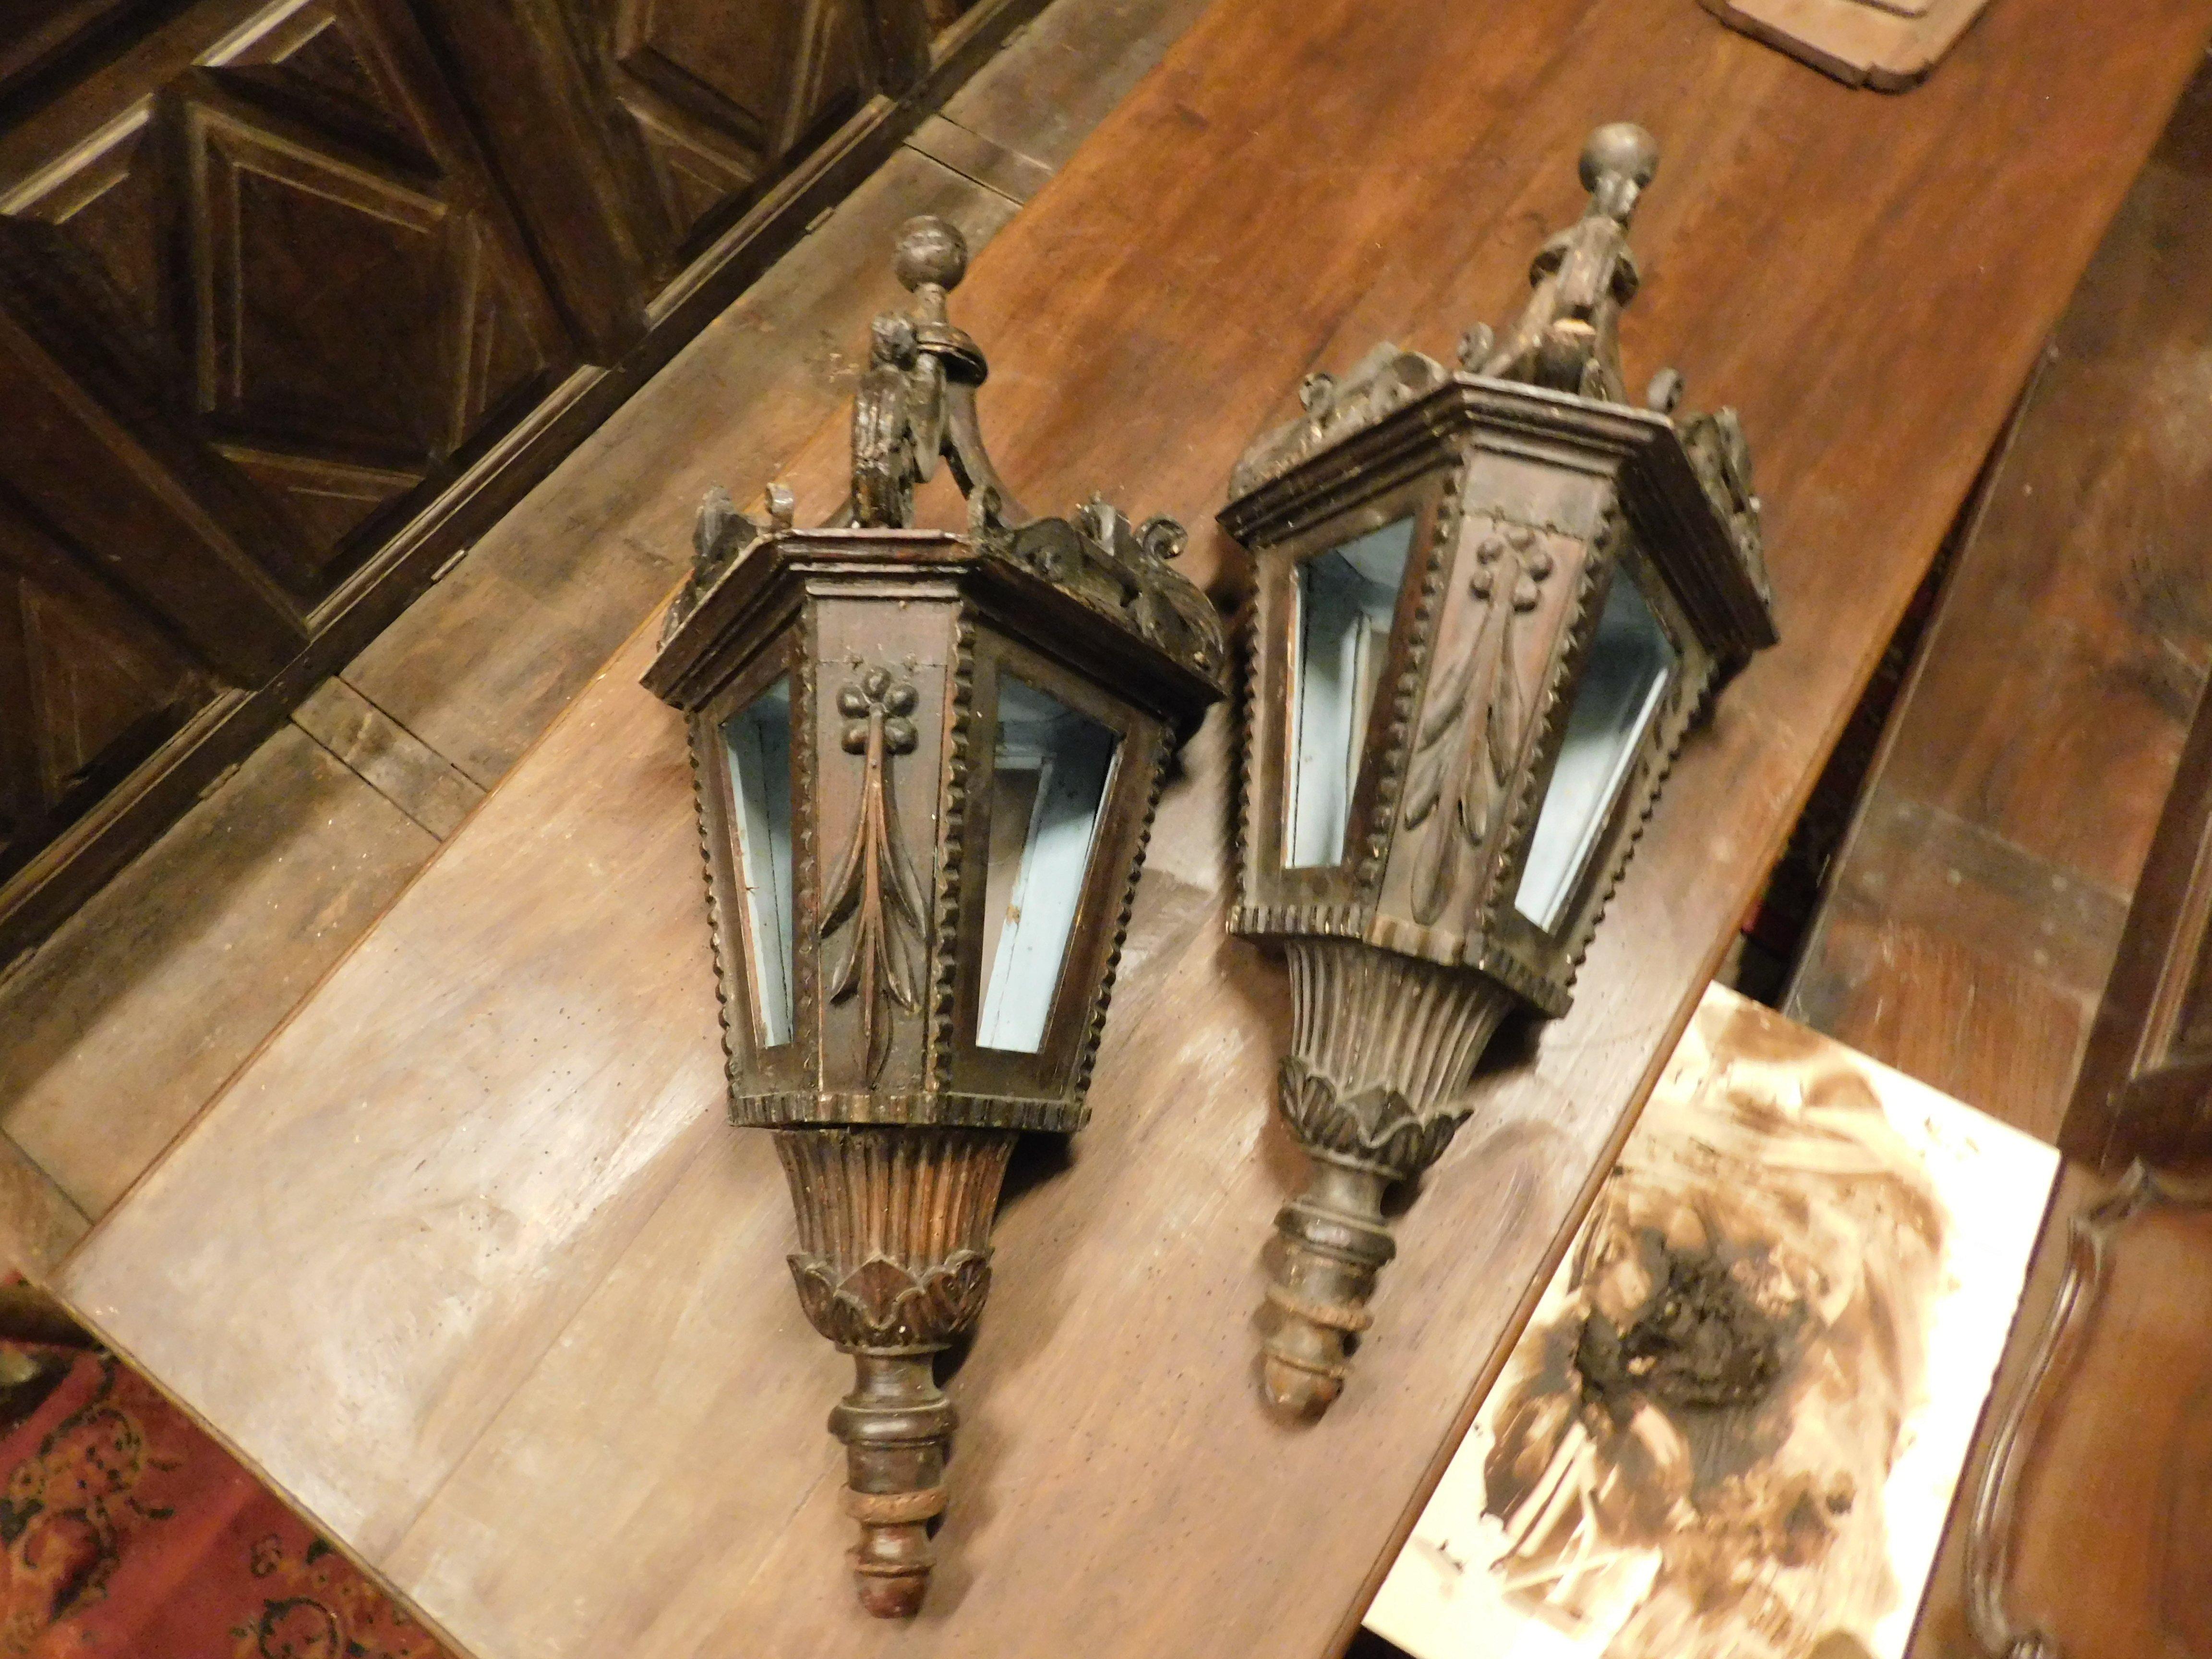 pair of ancient lamps, lamps without poles, carved in solid wood, then lacquered and painted, were used for processions or for use inside a church of the time, built in the 19th century in Italy.
Usable and adaptable to fascinating indoor lamps,